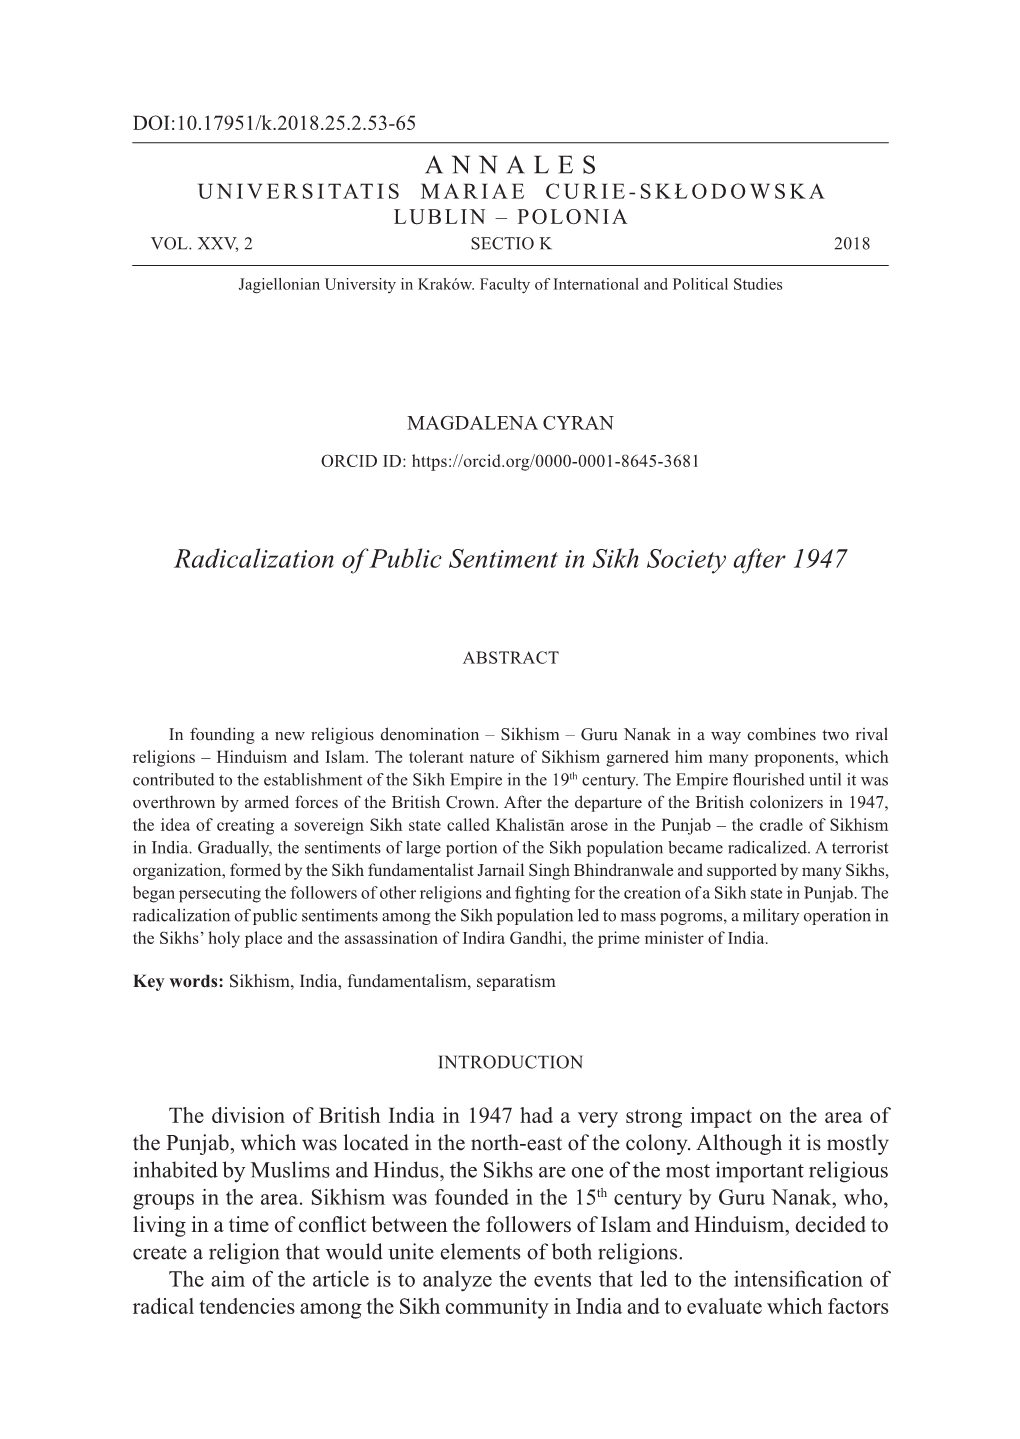 Radicalization of Public Sentiment in Sikh Society After 1947